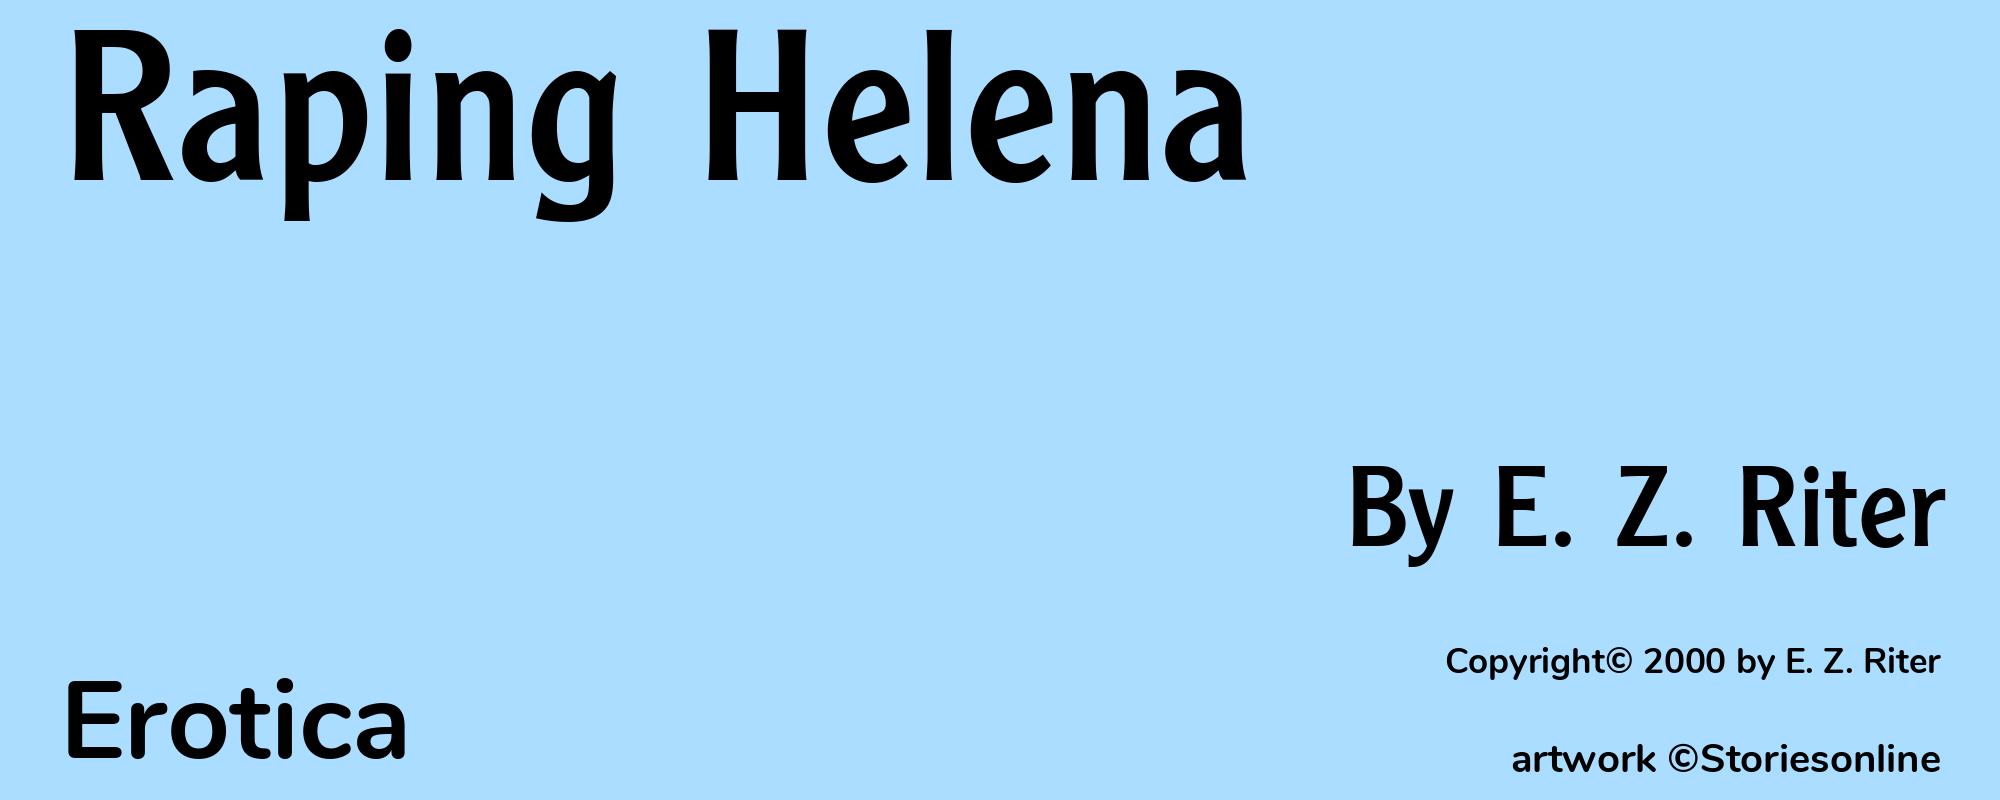 Raping Helena - Cover